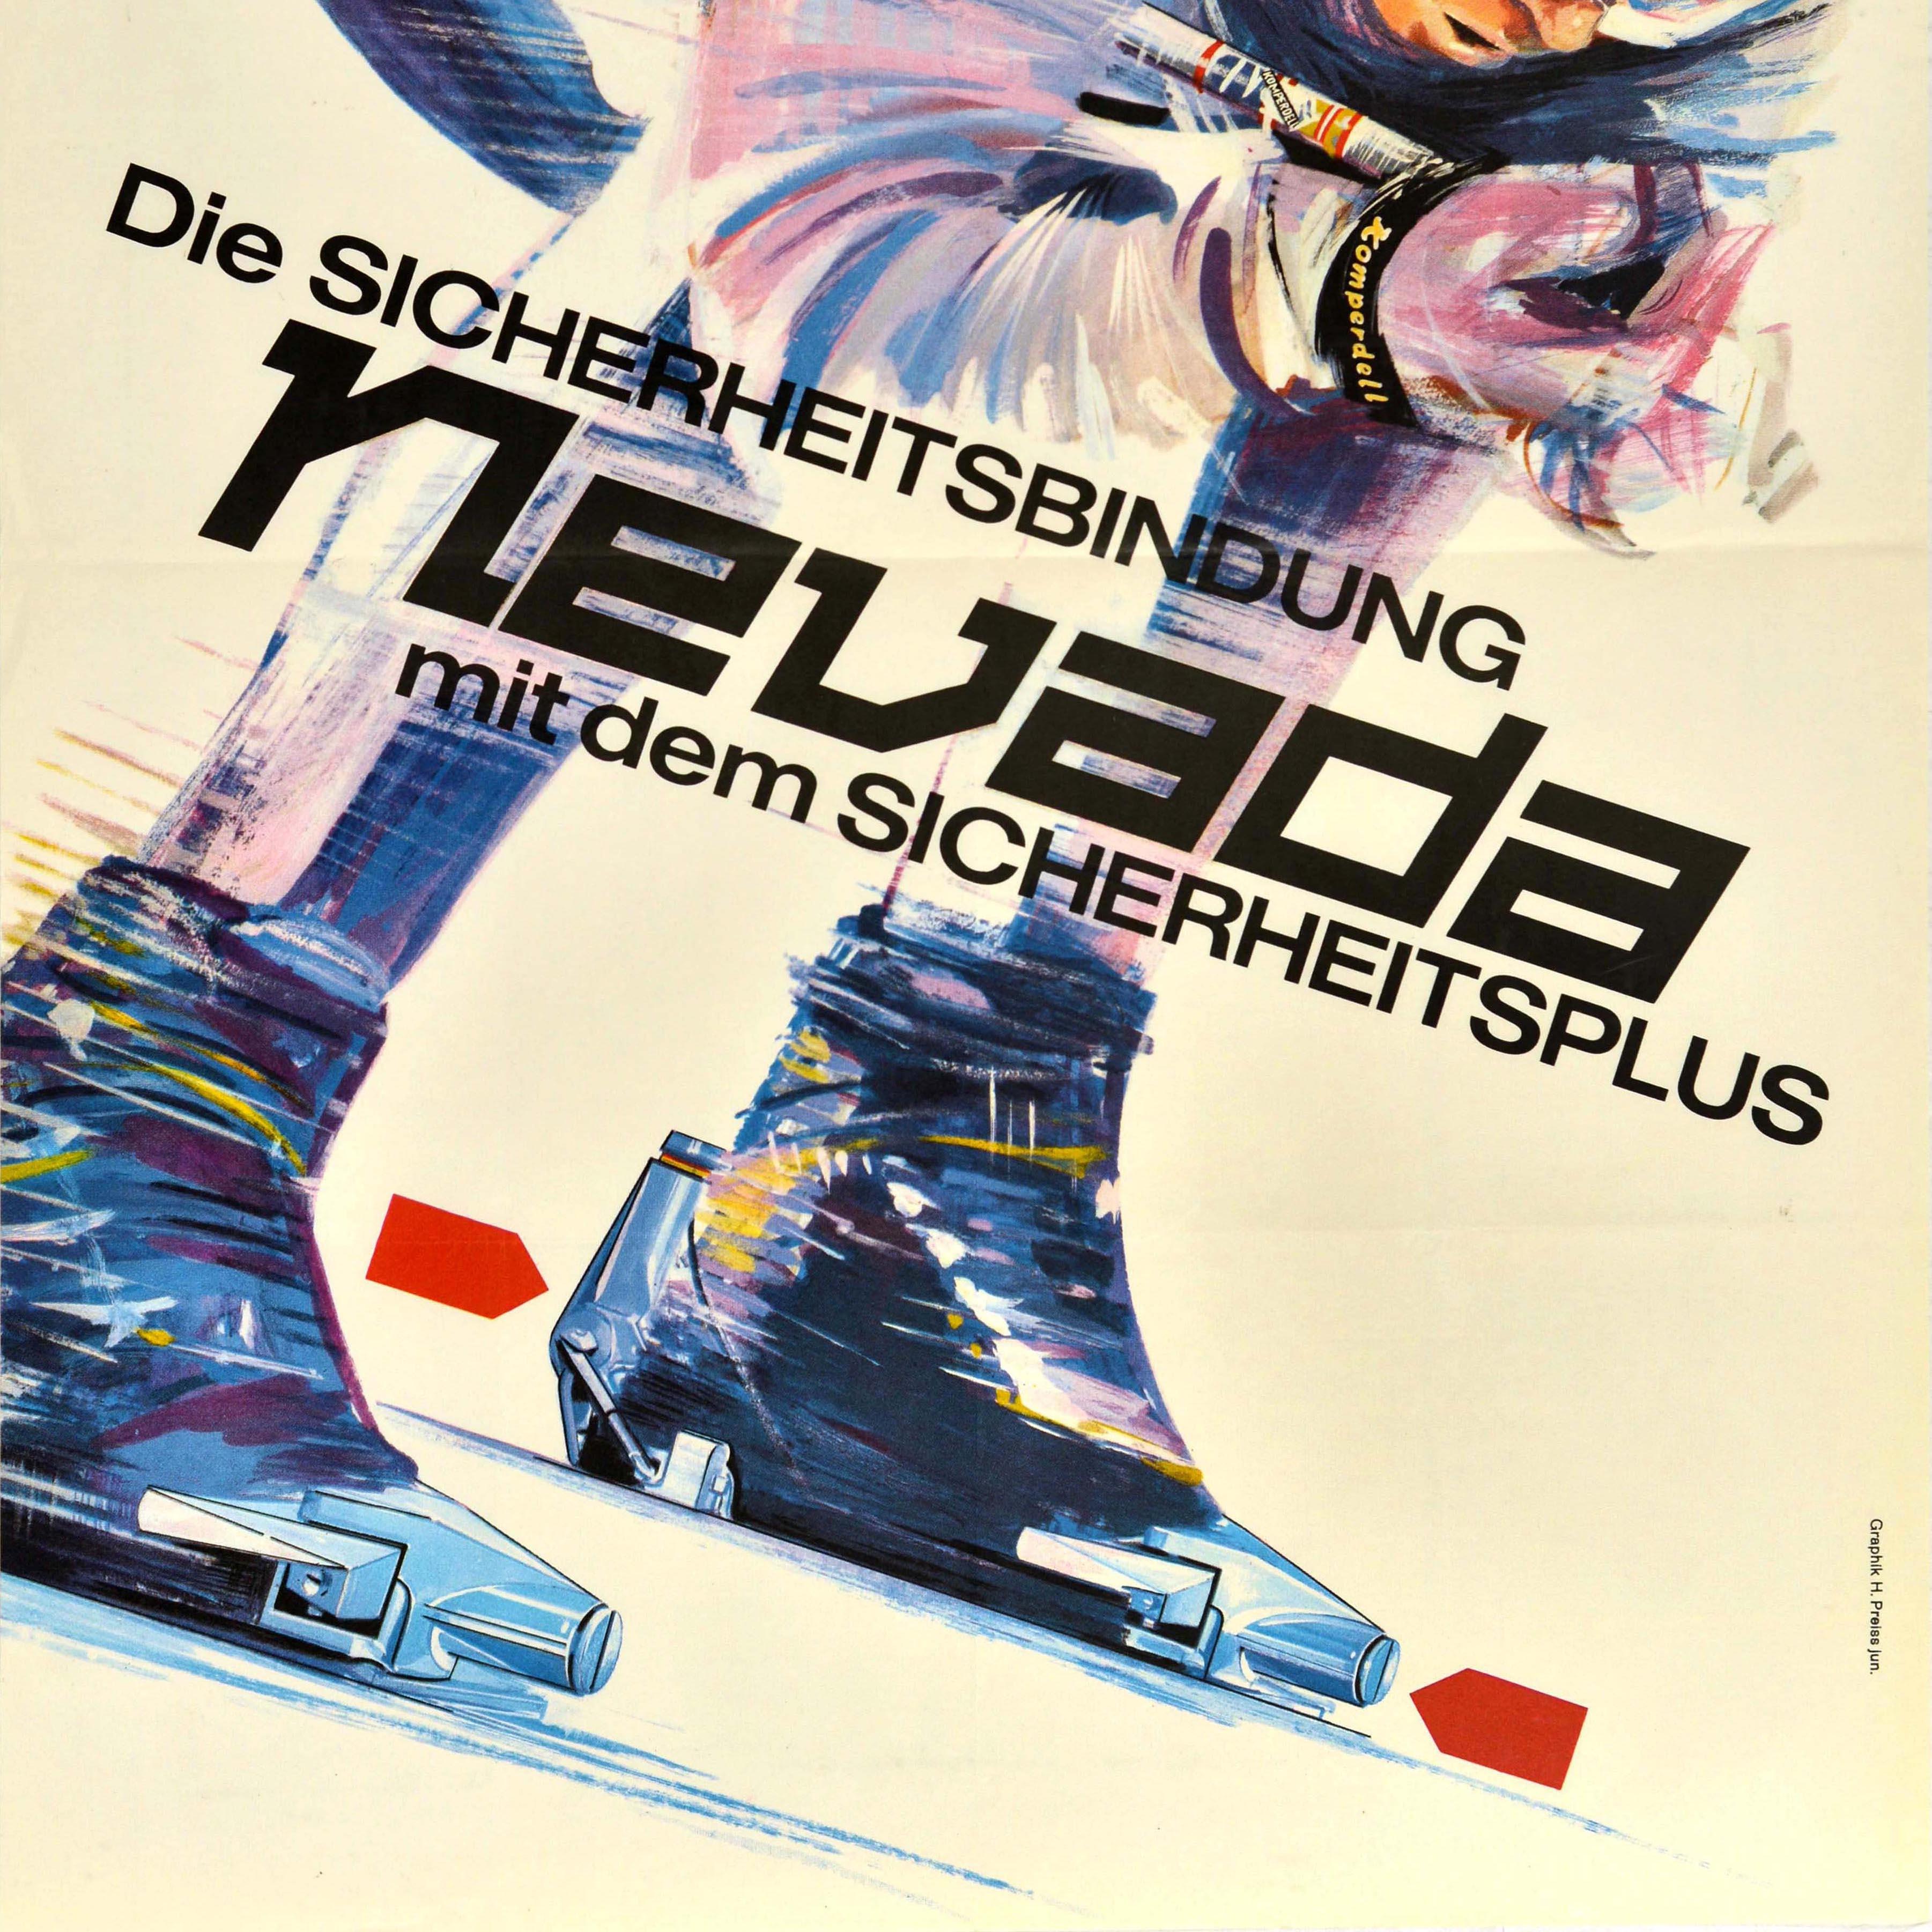 Original vintage poster for Nevada ski equipment - The safety binding Nevada with the safety plus / Die Sicherheitsbindung Nevada mit dem Sicherheitsplus - featuring a dynamic image of a skier wearing a helmet and goggles skiing at speed downhill